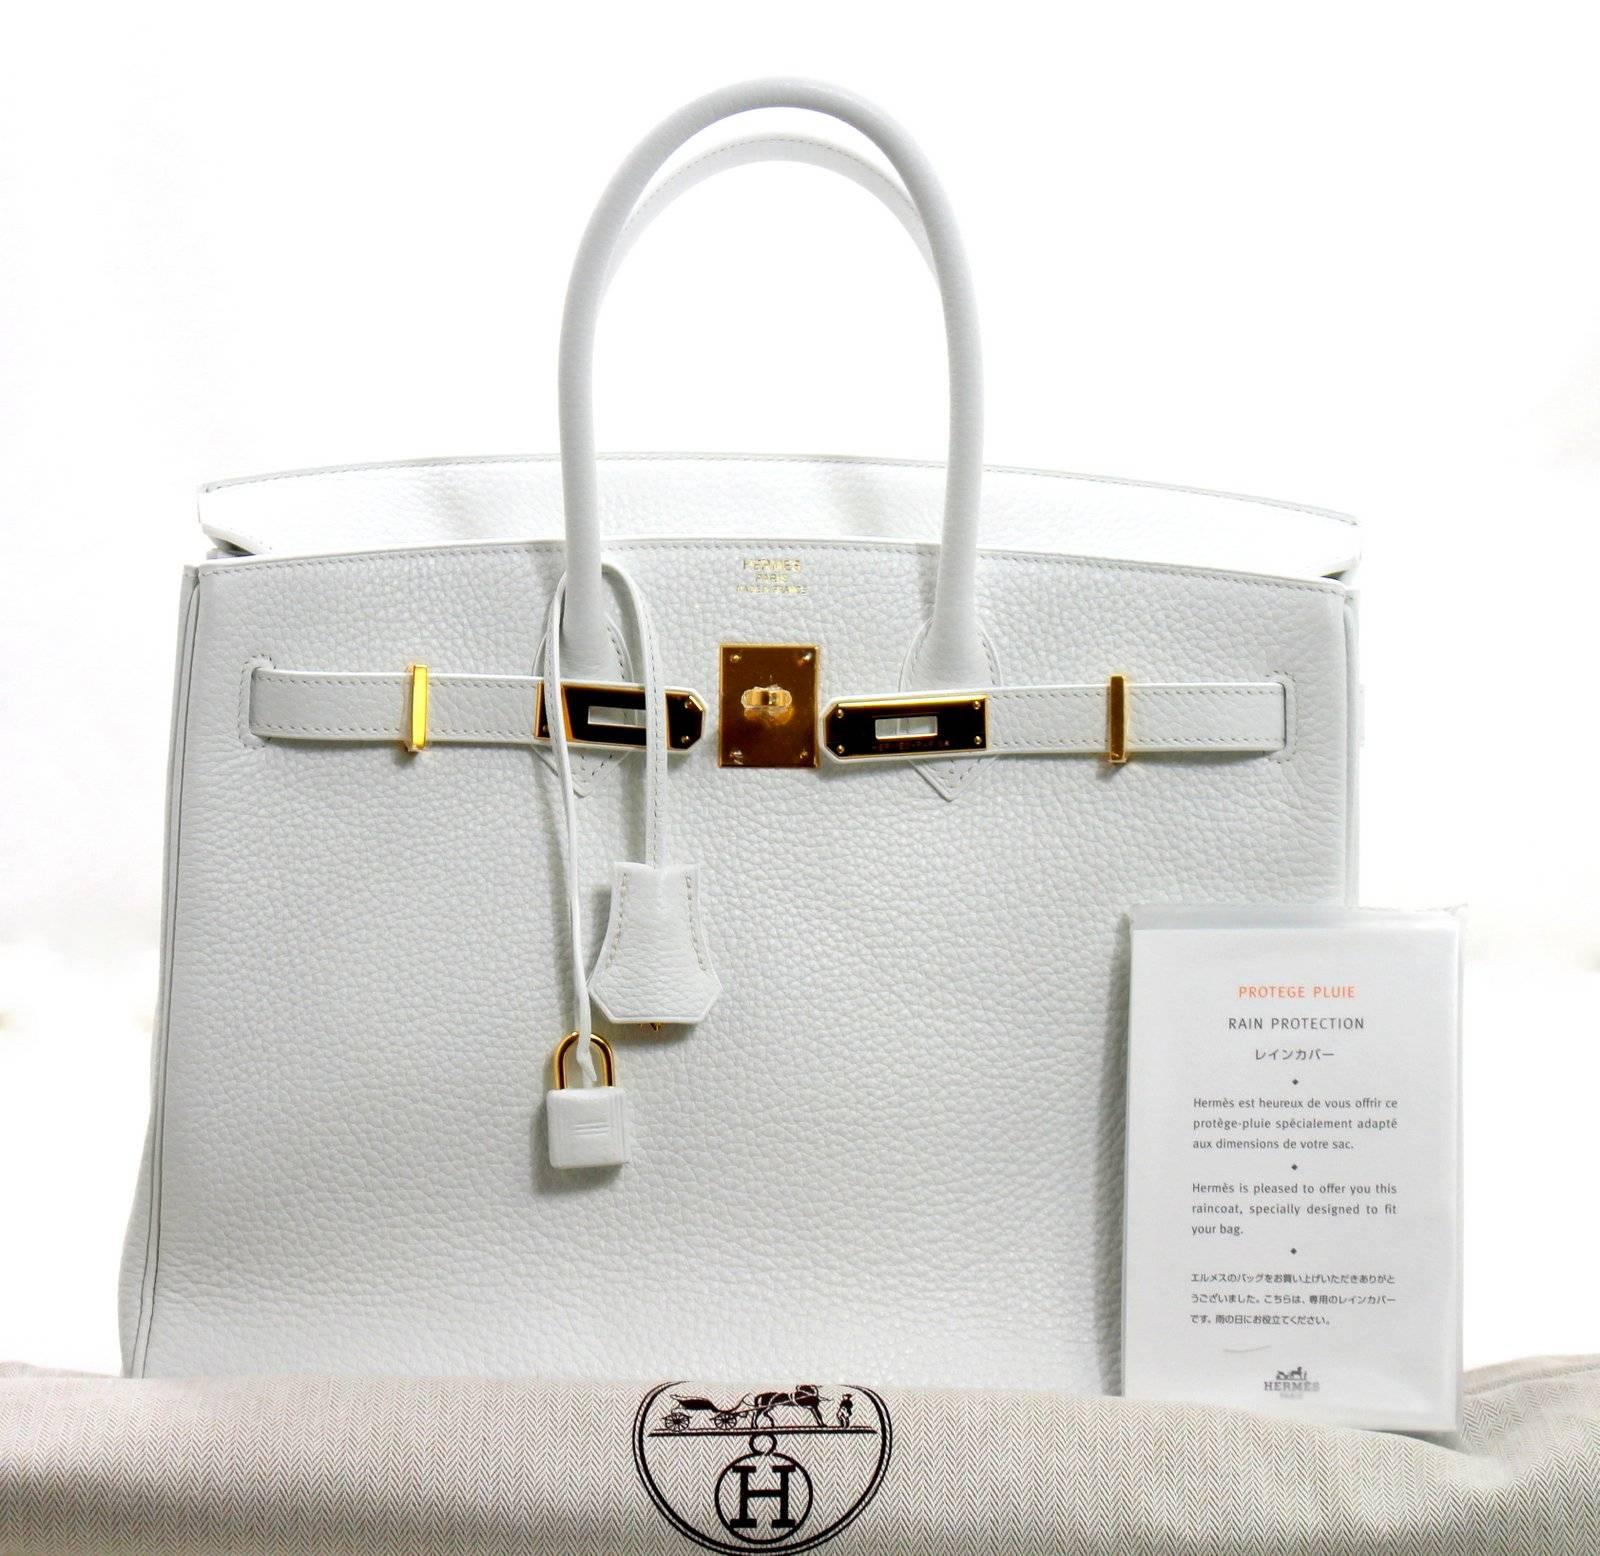 Hermès WHITE Clemence Birkin Bag- 35 cm with GHW, T stamp For Sale 5